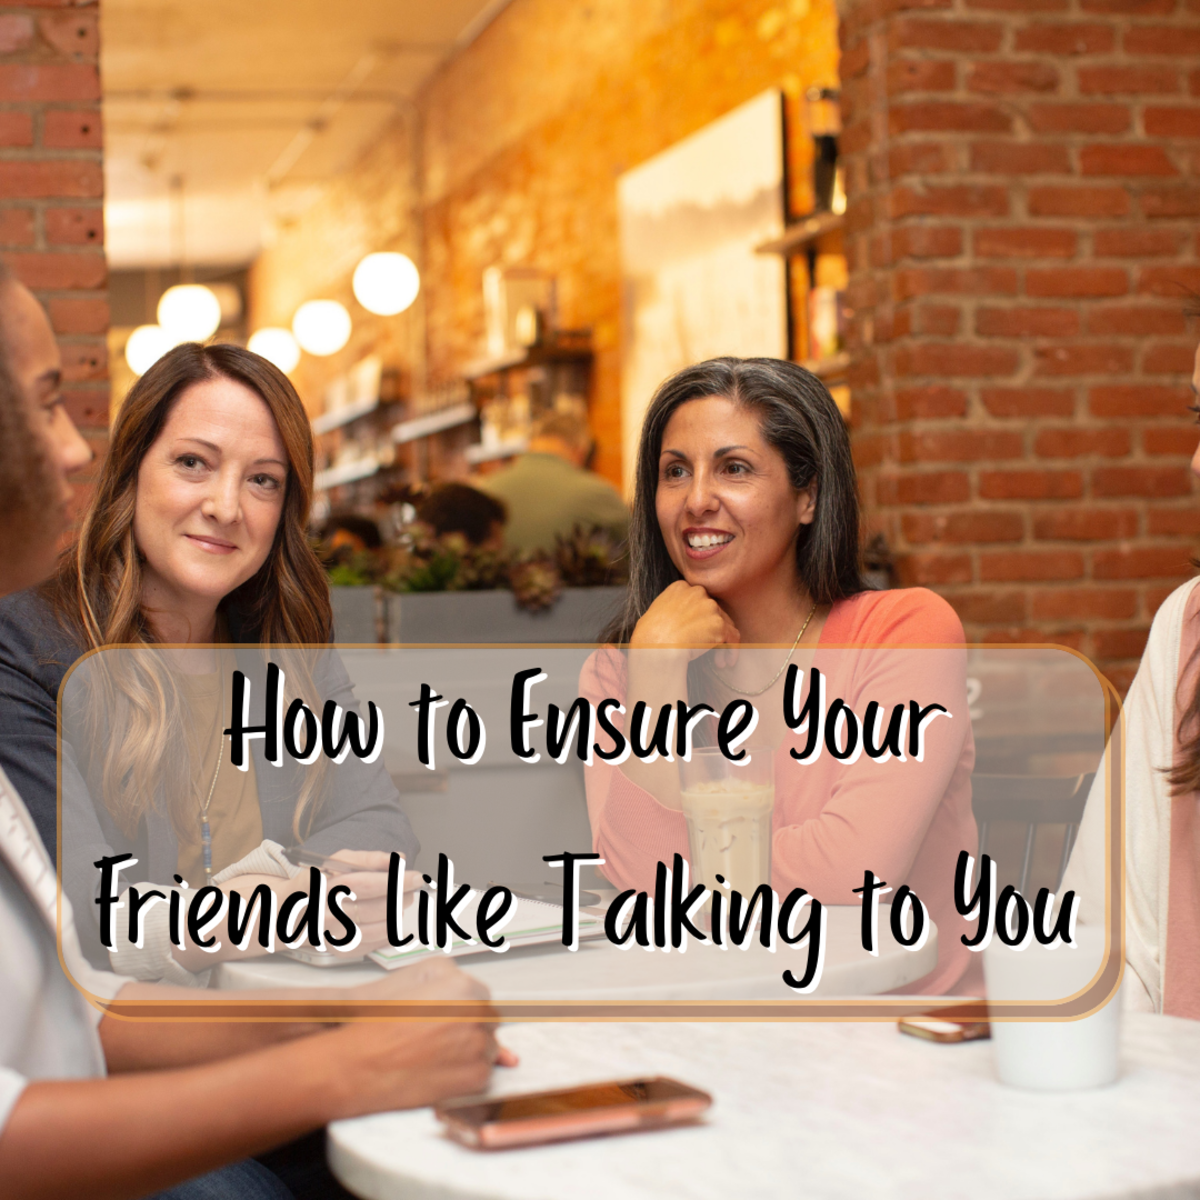 One thing's for sure: you enjoy chatting with your friends! But do you ever wonder if they enjoy talking with you? You certainly don't want to make them feel obligated to chat. This article will help you make sure your friends enjoy talking with you.